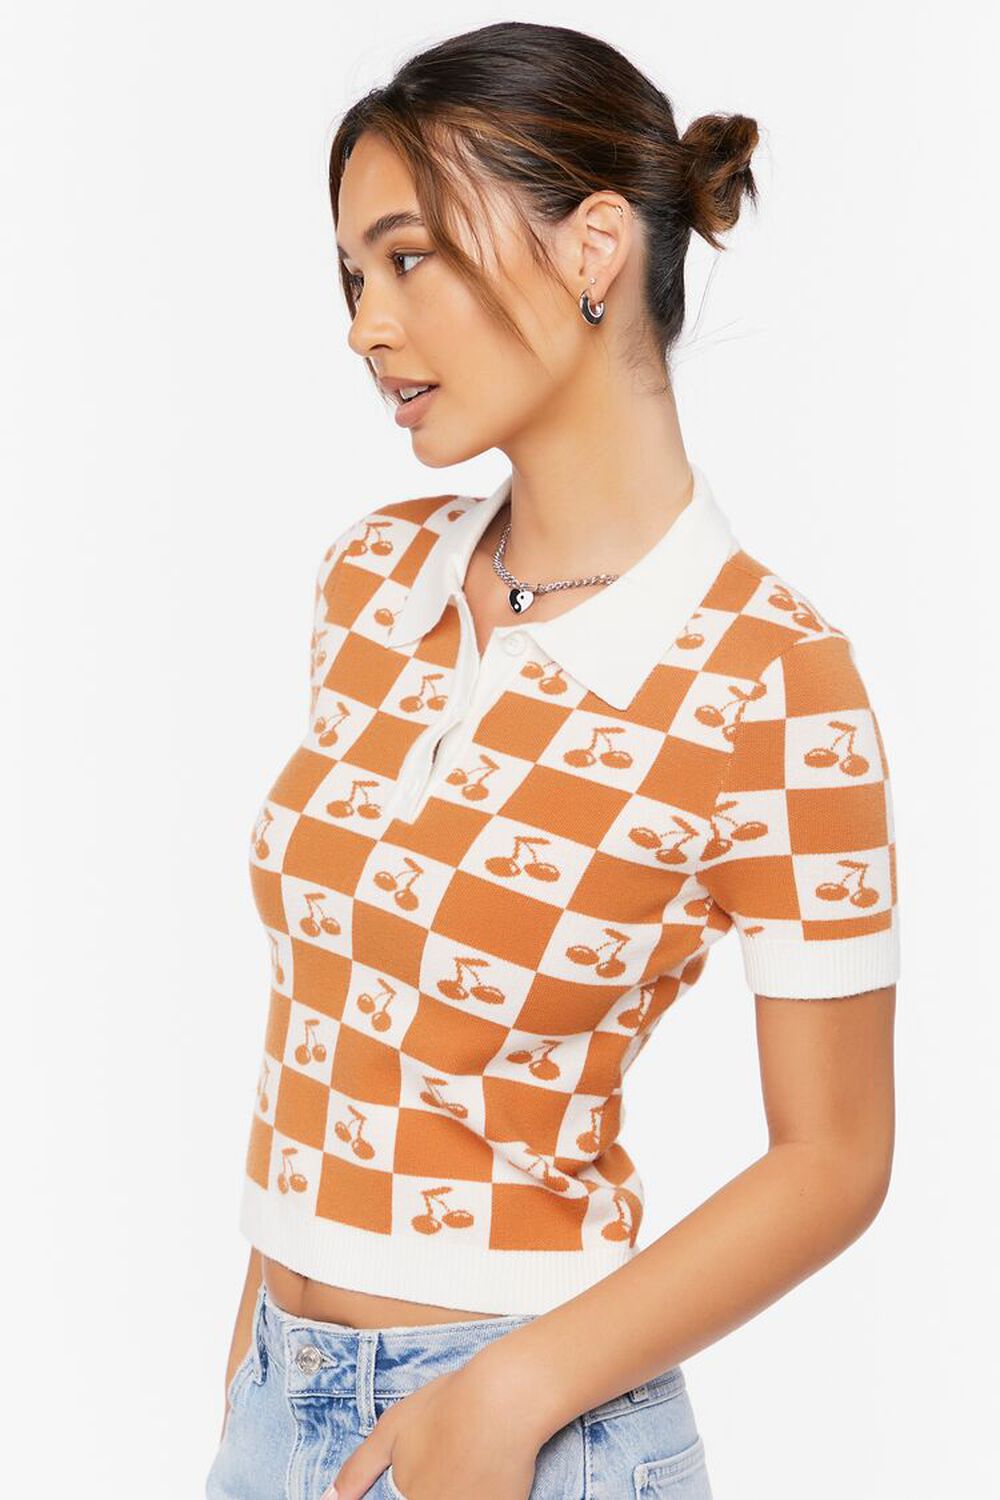 APRICOT/CREAM Cherry Checkered Sweater-Knit Top, image 2